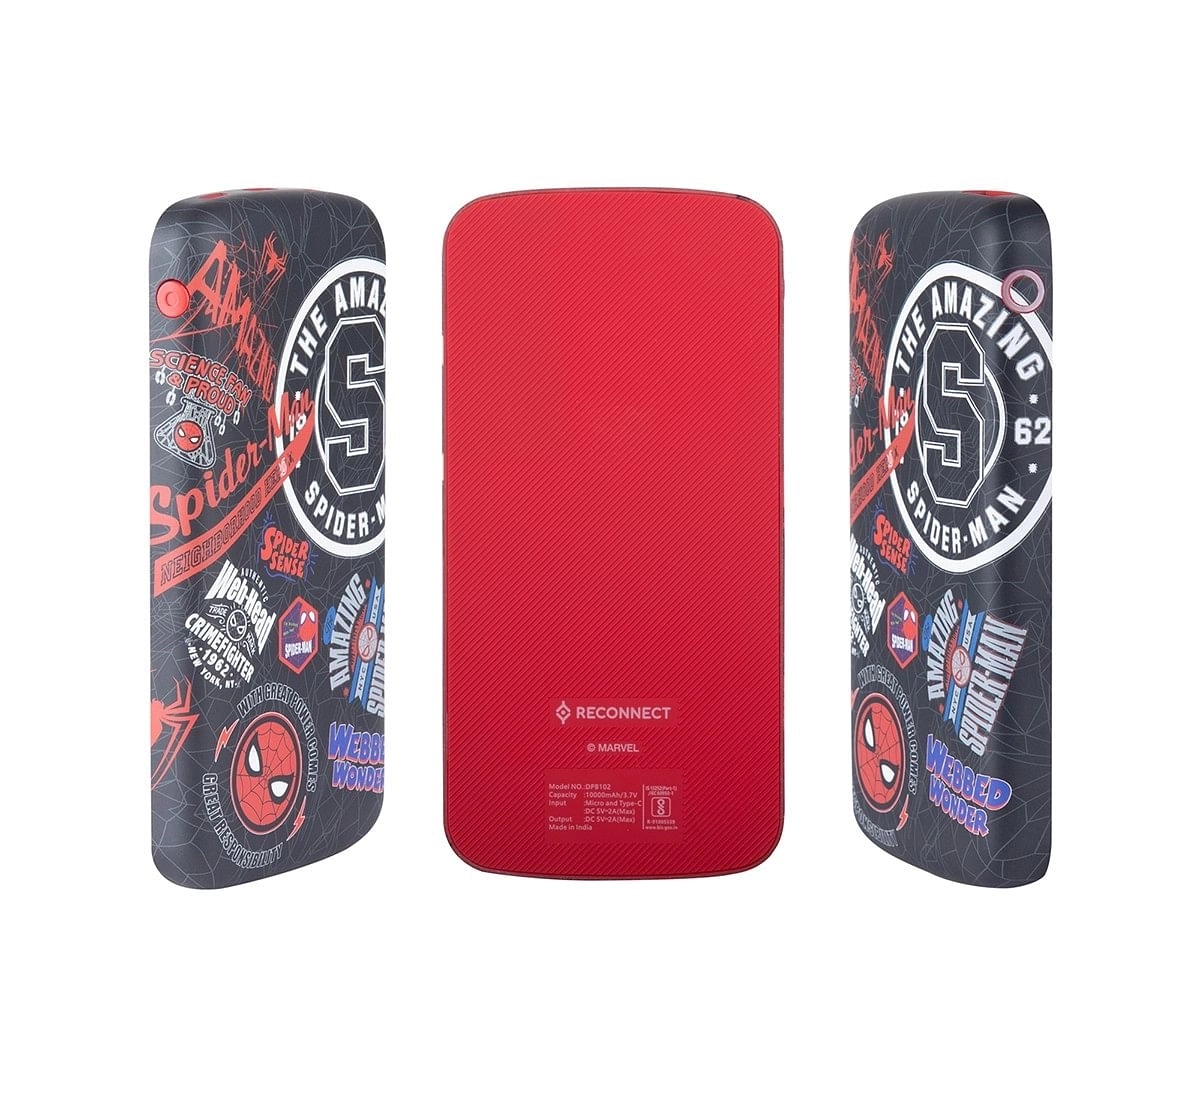 Disney Reconnect PowerBank 10000mAh2A DPB102 SM Electronics Accessories for Kids age 13Y+ 